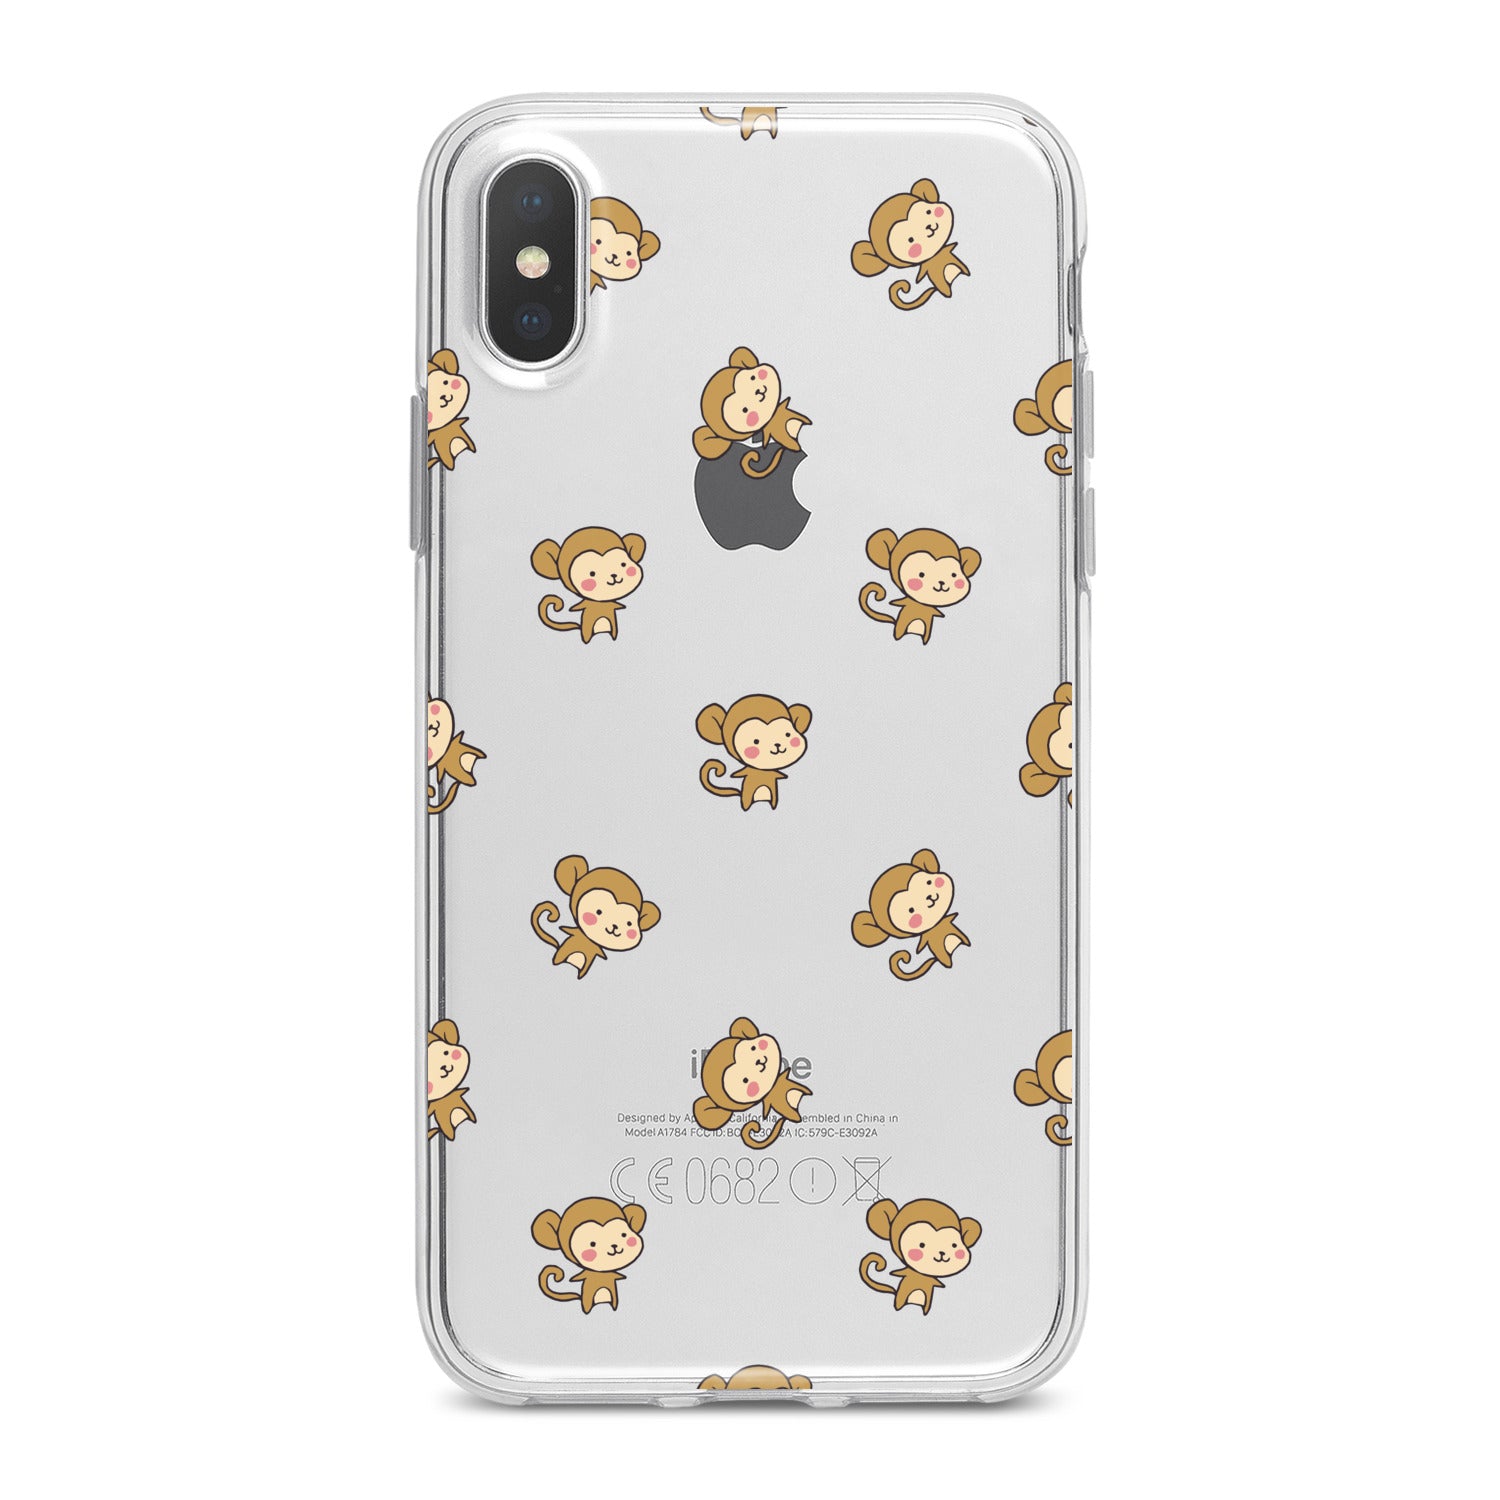 Lex Altern Baby Monkey Pattern Phone Case for your iPhone & Android phone.